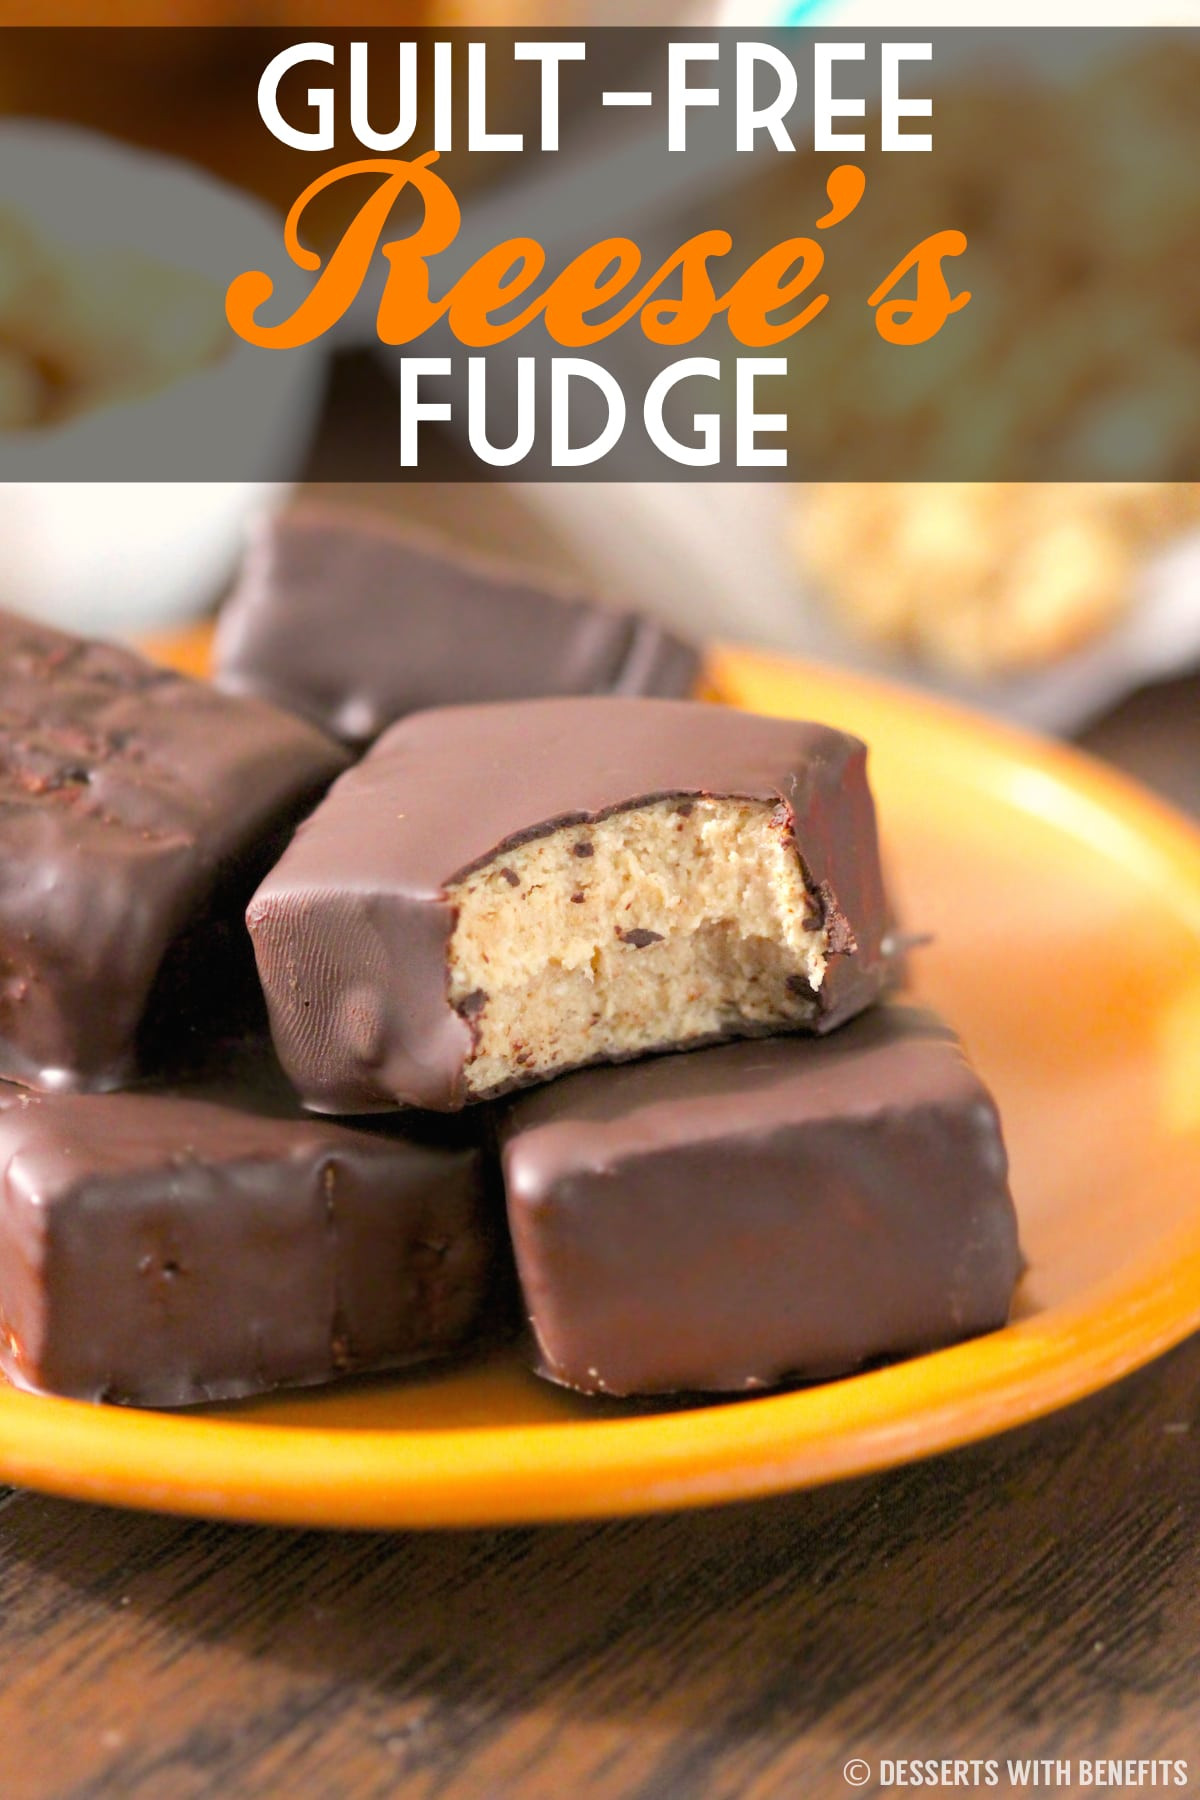 Low Calorie Low Carb Desserts
 Healthy Reese s Fudge Desserts with Benefits